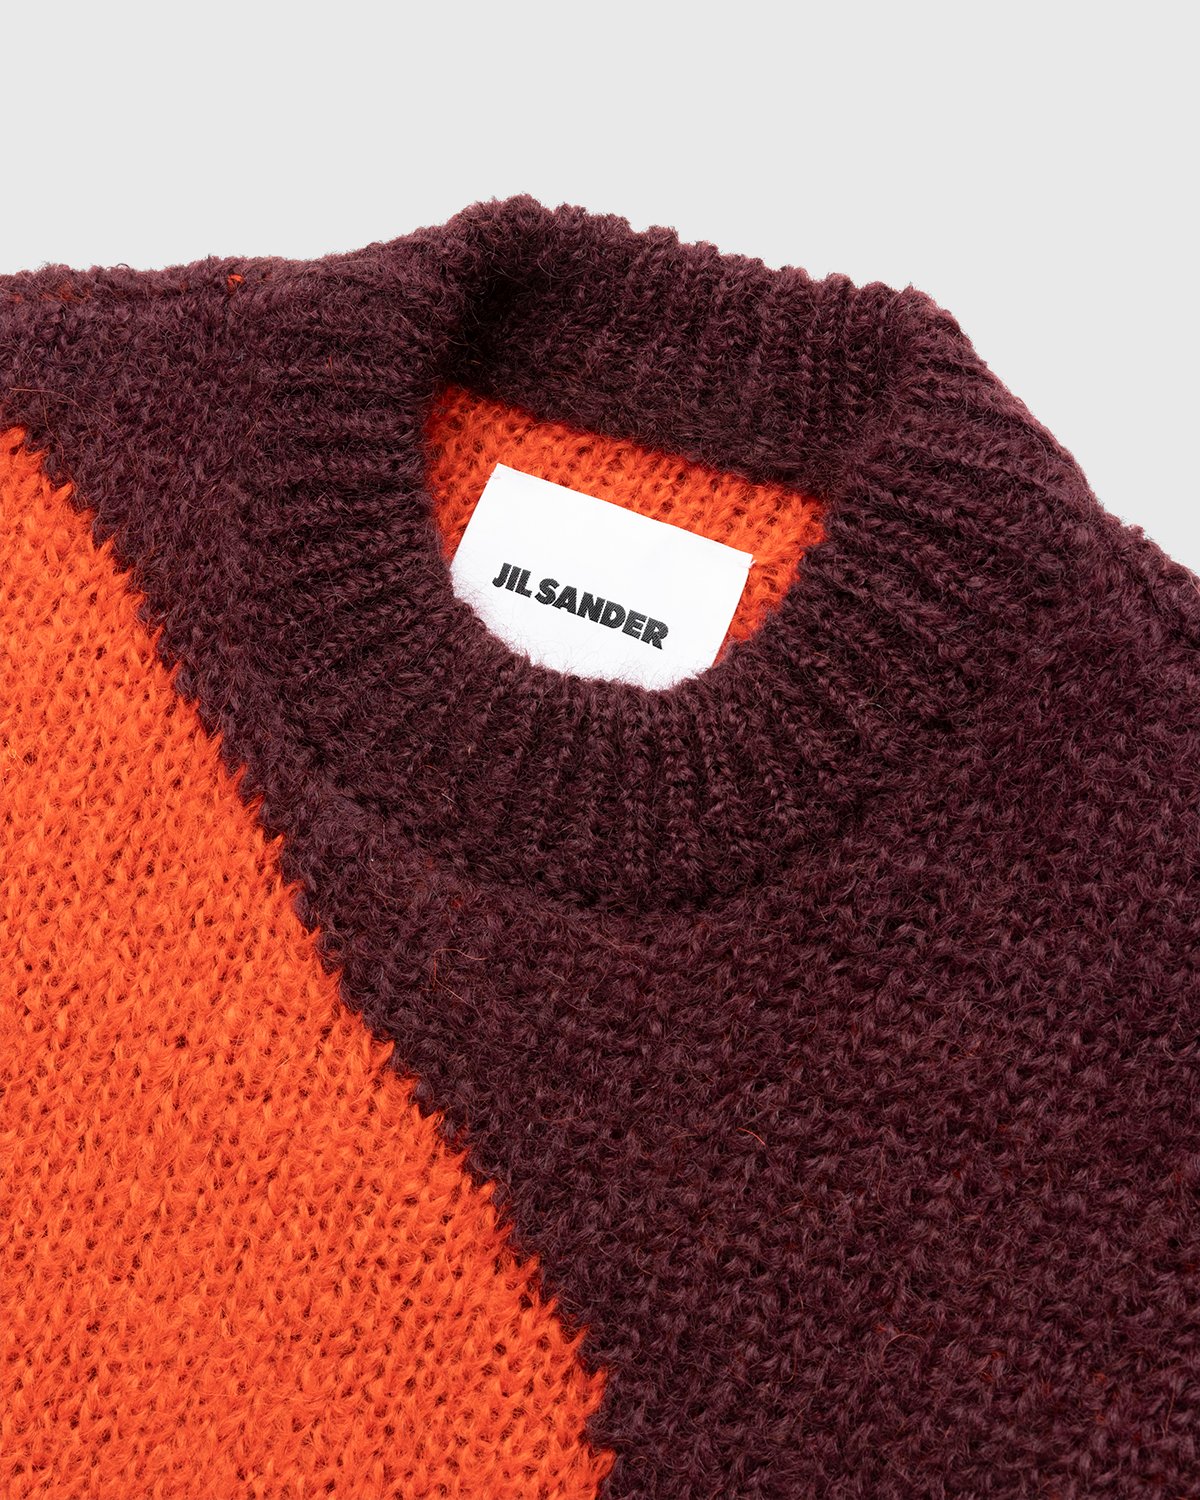 Jil Sander - Sweater Knitted Open Red - Clothing - Red - Image 3